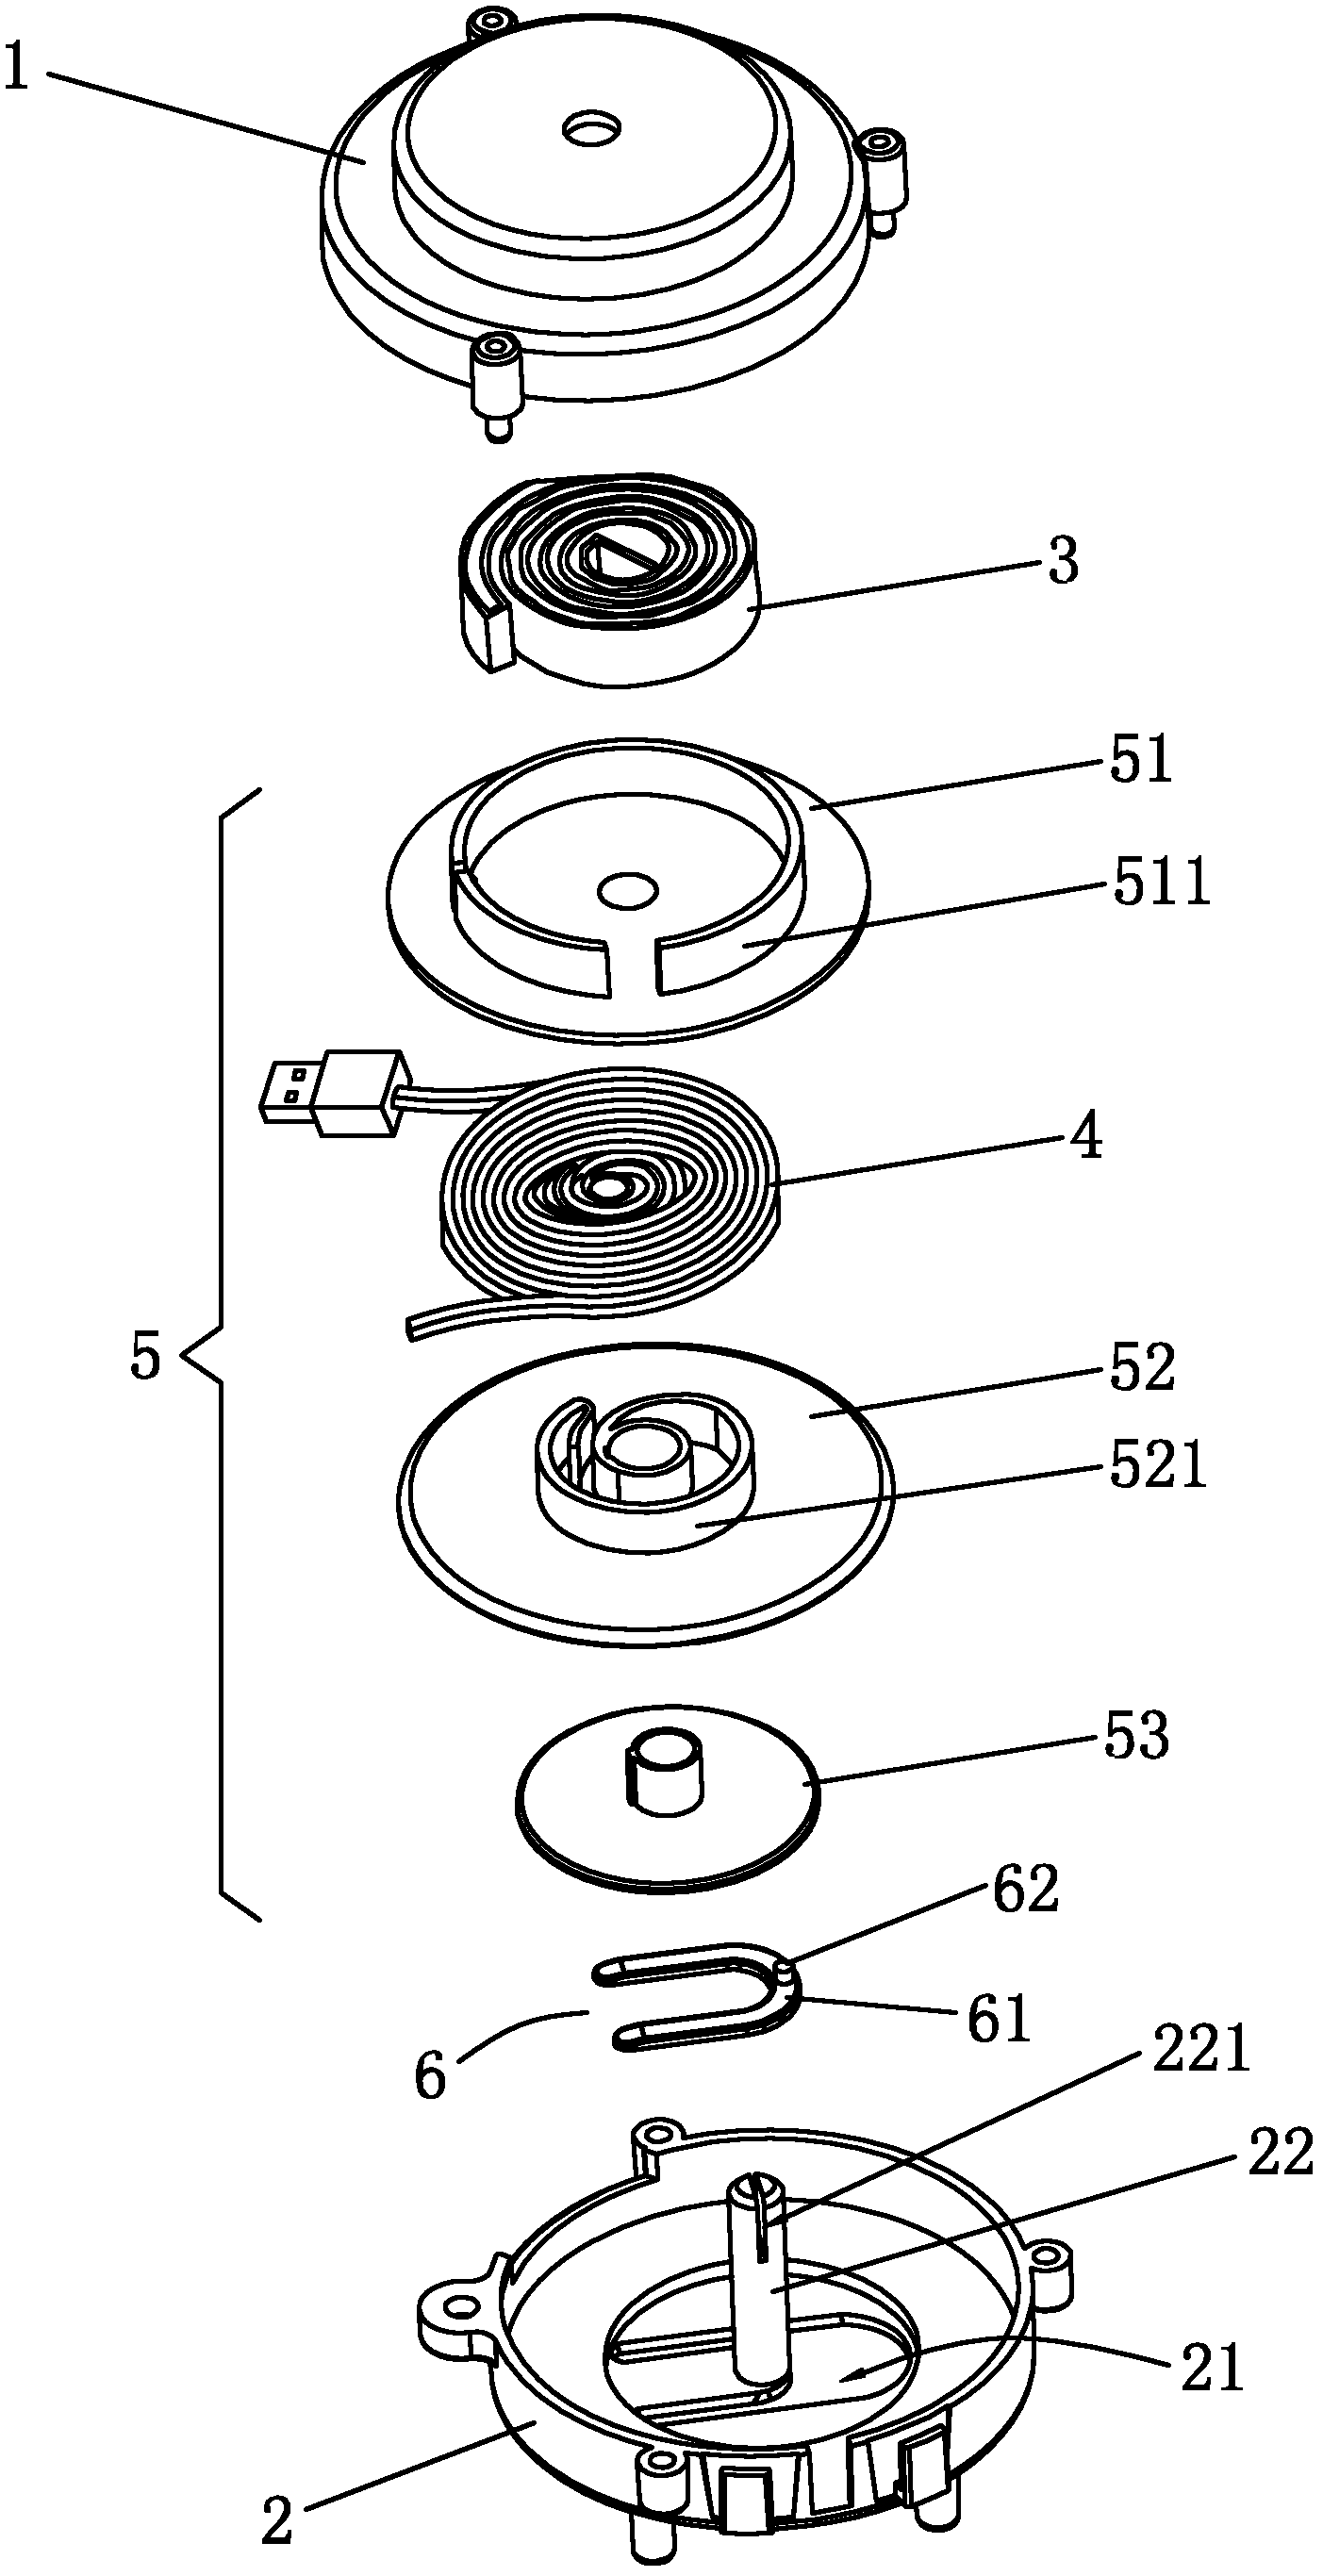 Wire coiling and uncoiling device